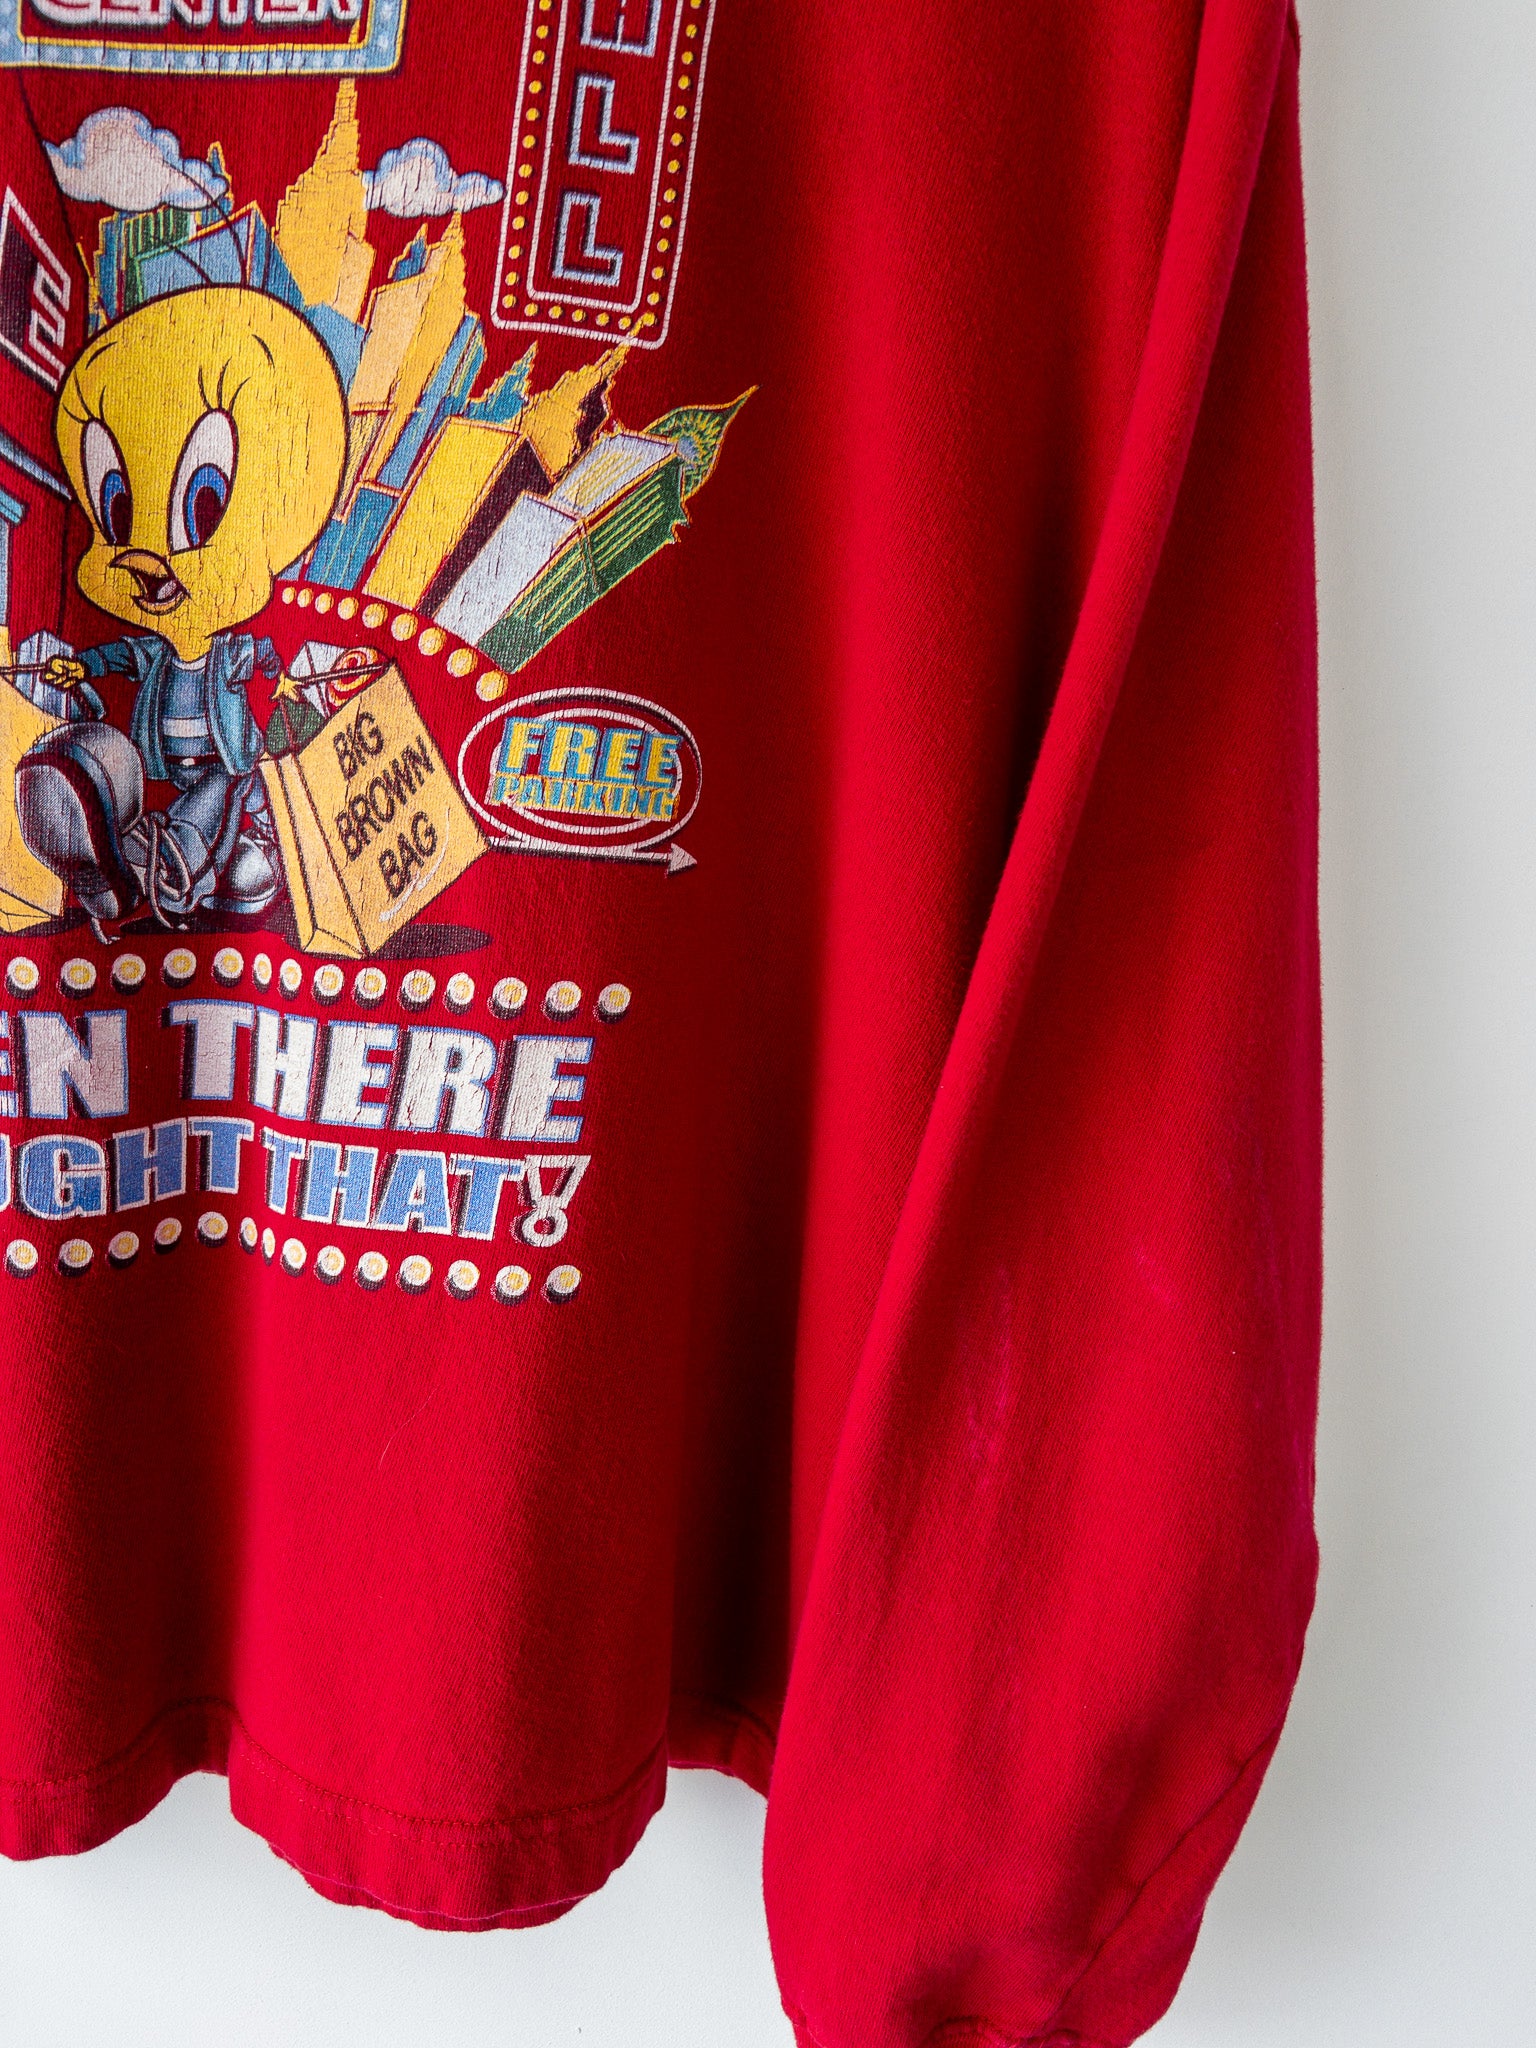 Vintage Tweety 'Been There Bought That!' Sweatshirt (L)